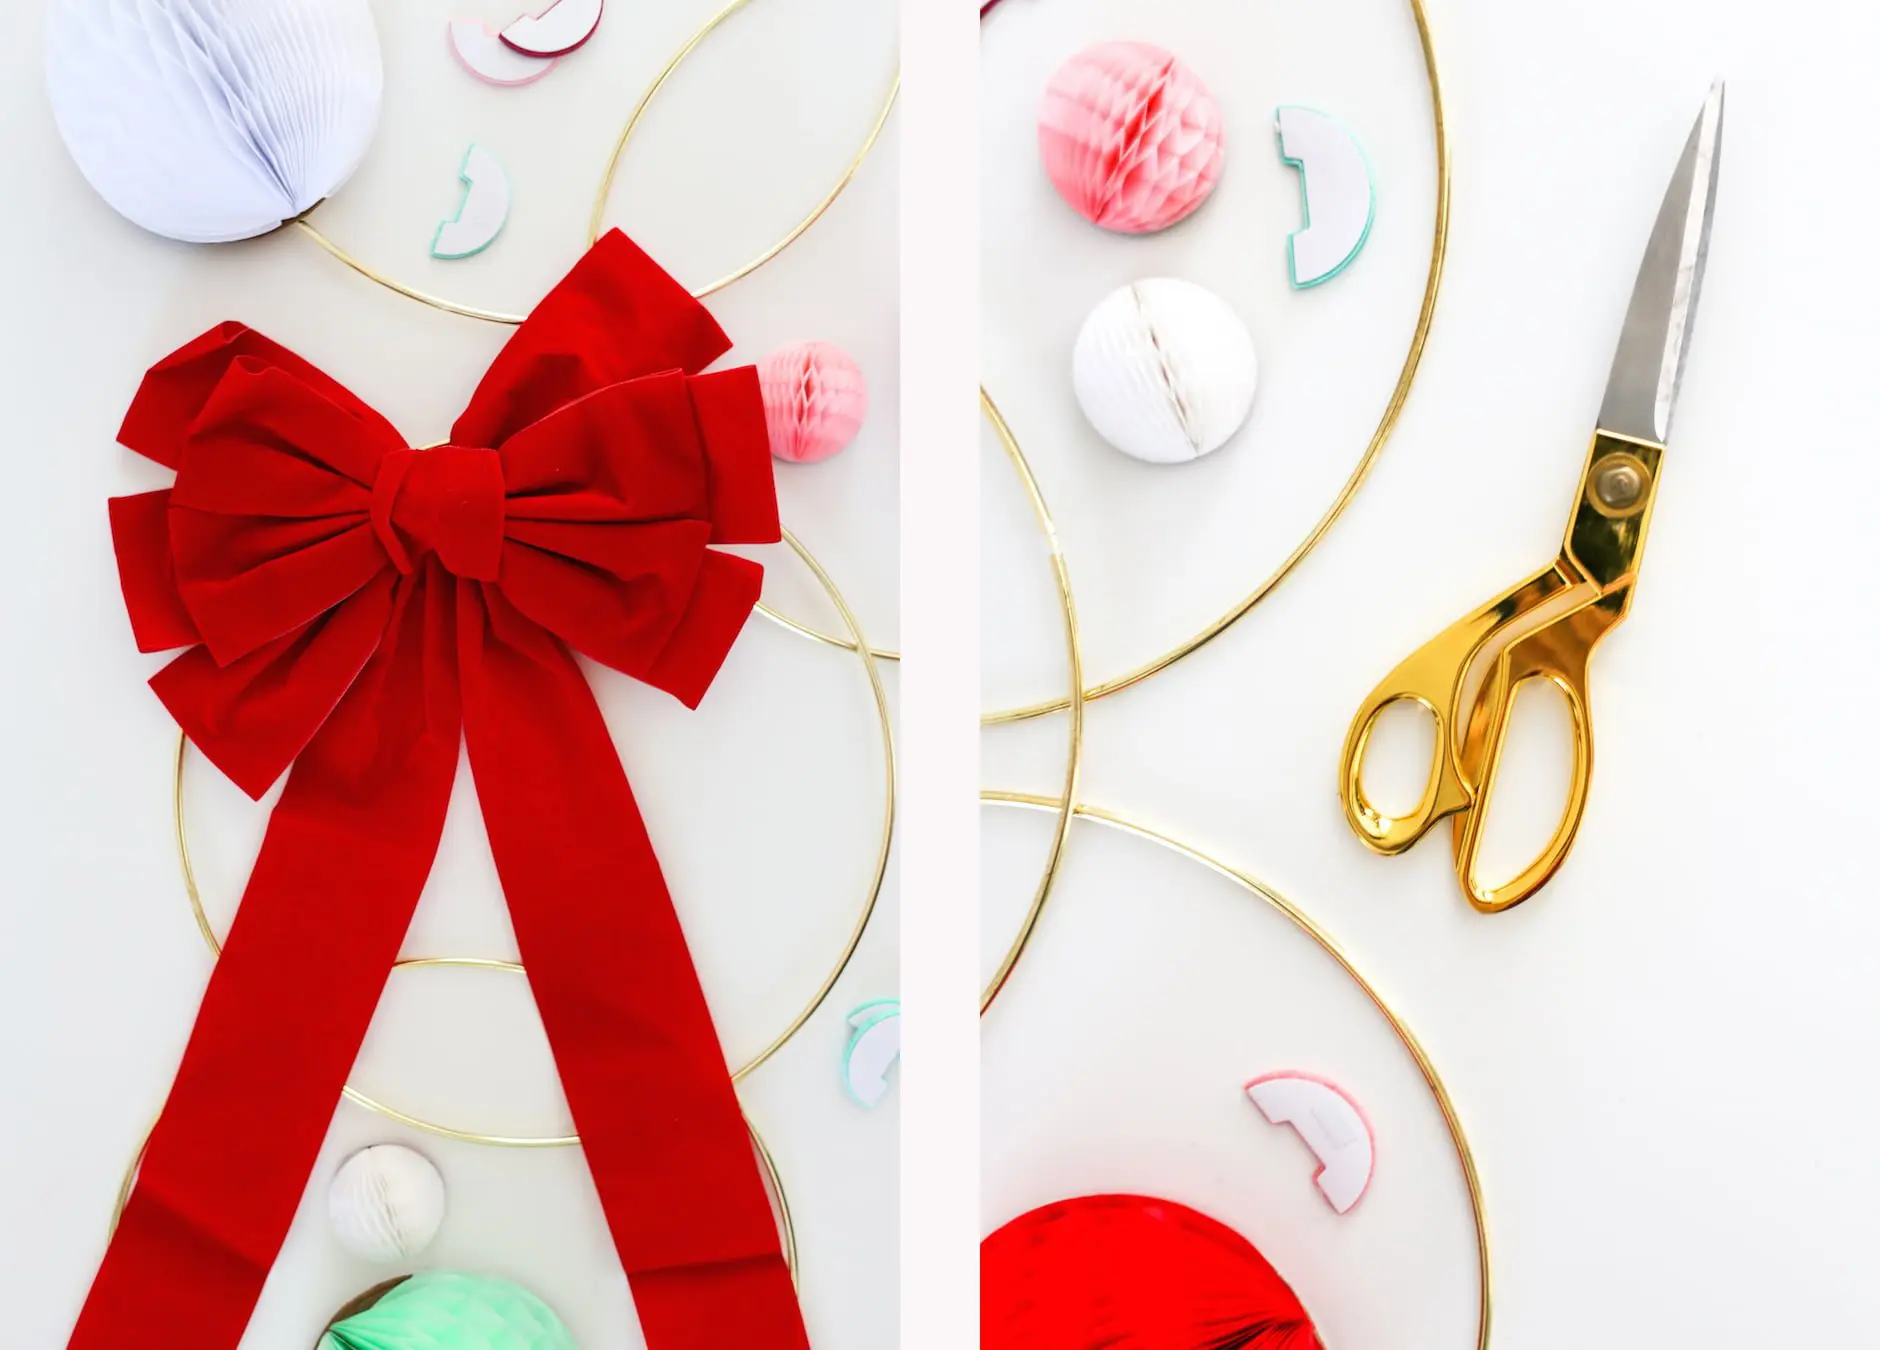 Host a Modern Holiday Wreath Making Party, How to Throw a Wreath Making Party, Honeycomb Wreath, DIY Holiday Wreath Party, Brunch, Holiday Wreath-Making Brunch Party, Christmas Wreath-Making Party, Honeycomb Christmas Wreath Tutorial, How to Throw a Wreath Making Party